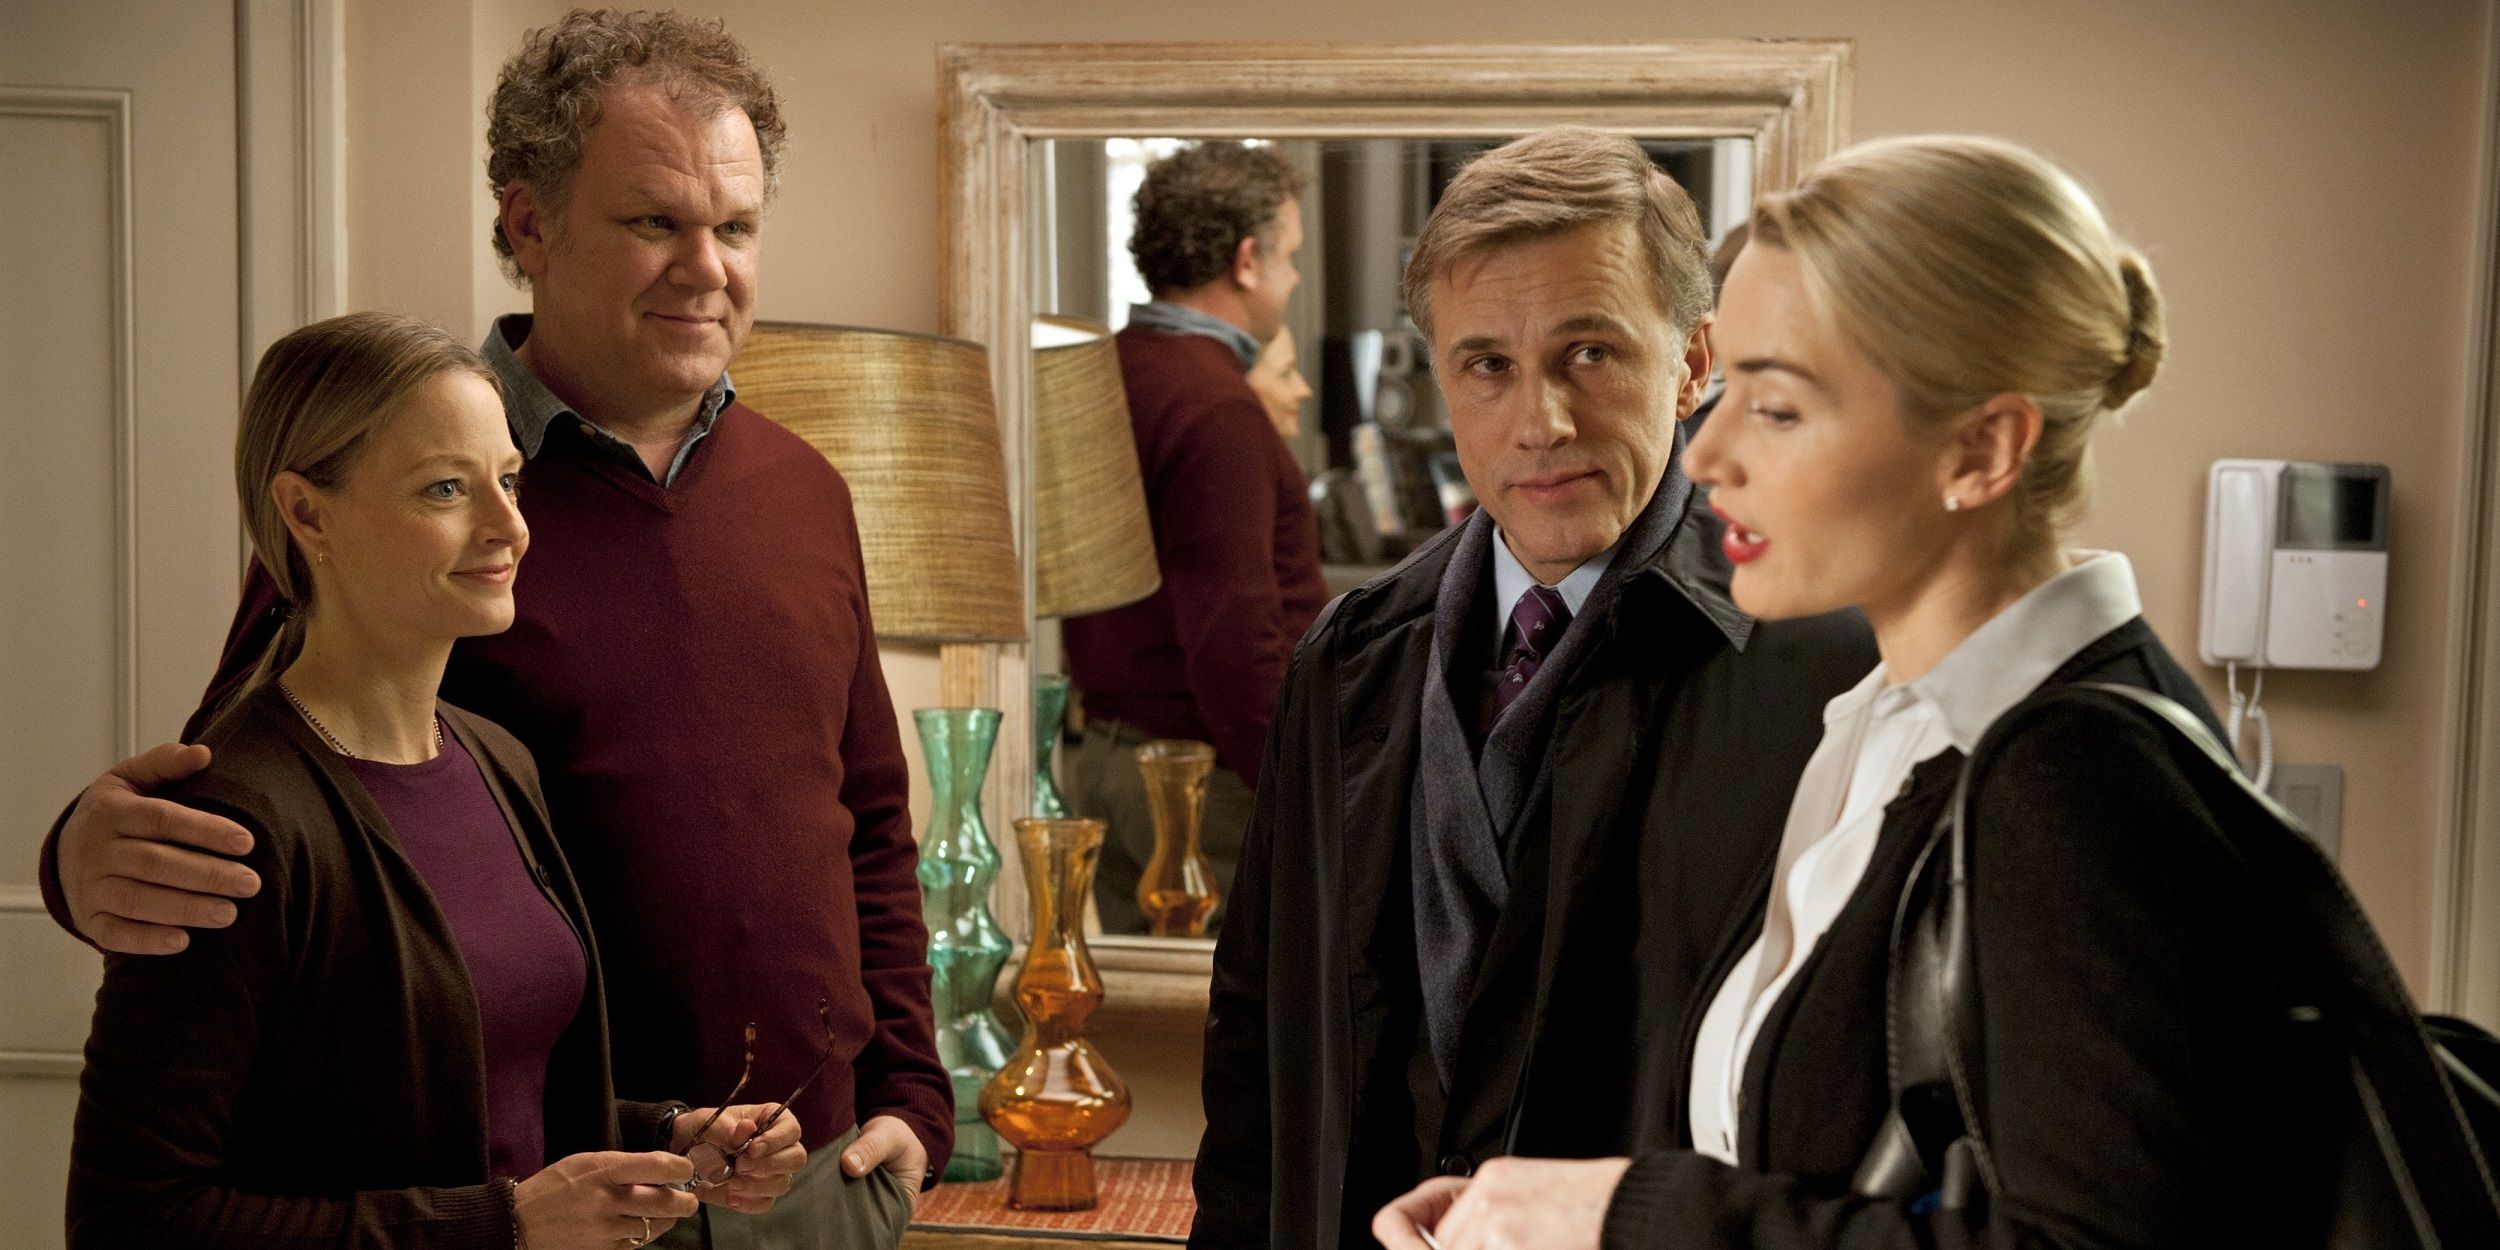 John C Reilly, Jodie Foster, Christoph Waltz, and Kate Winslet all star in Carnage